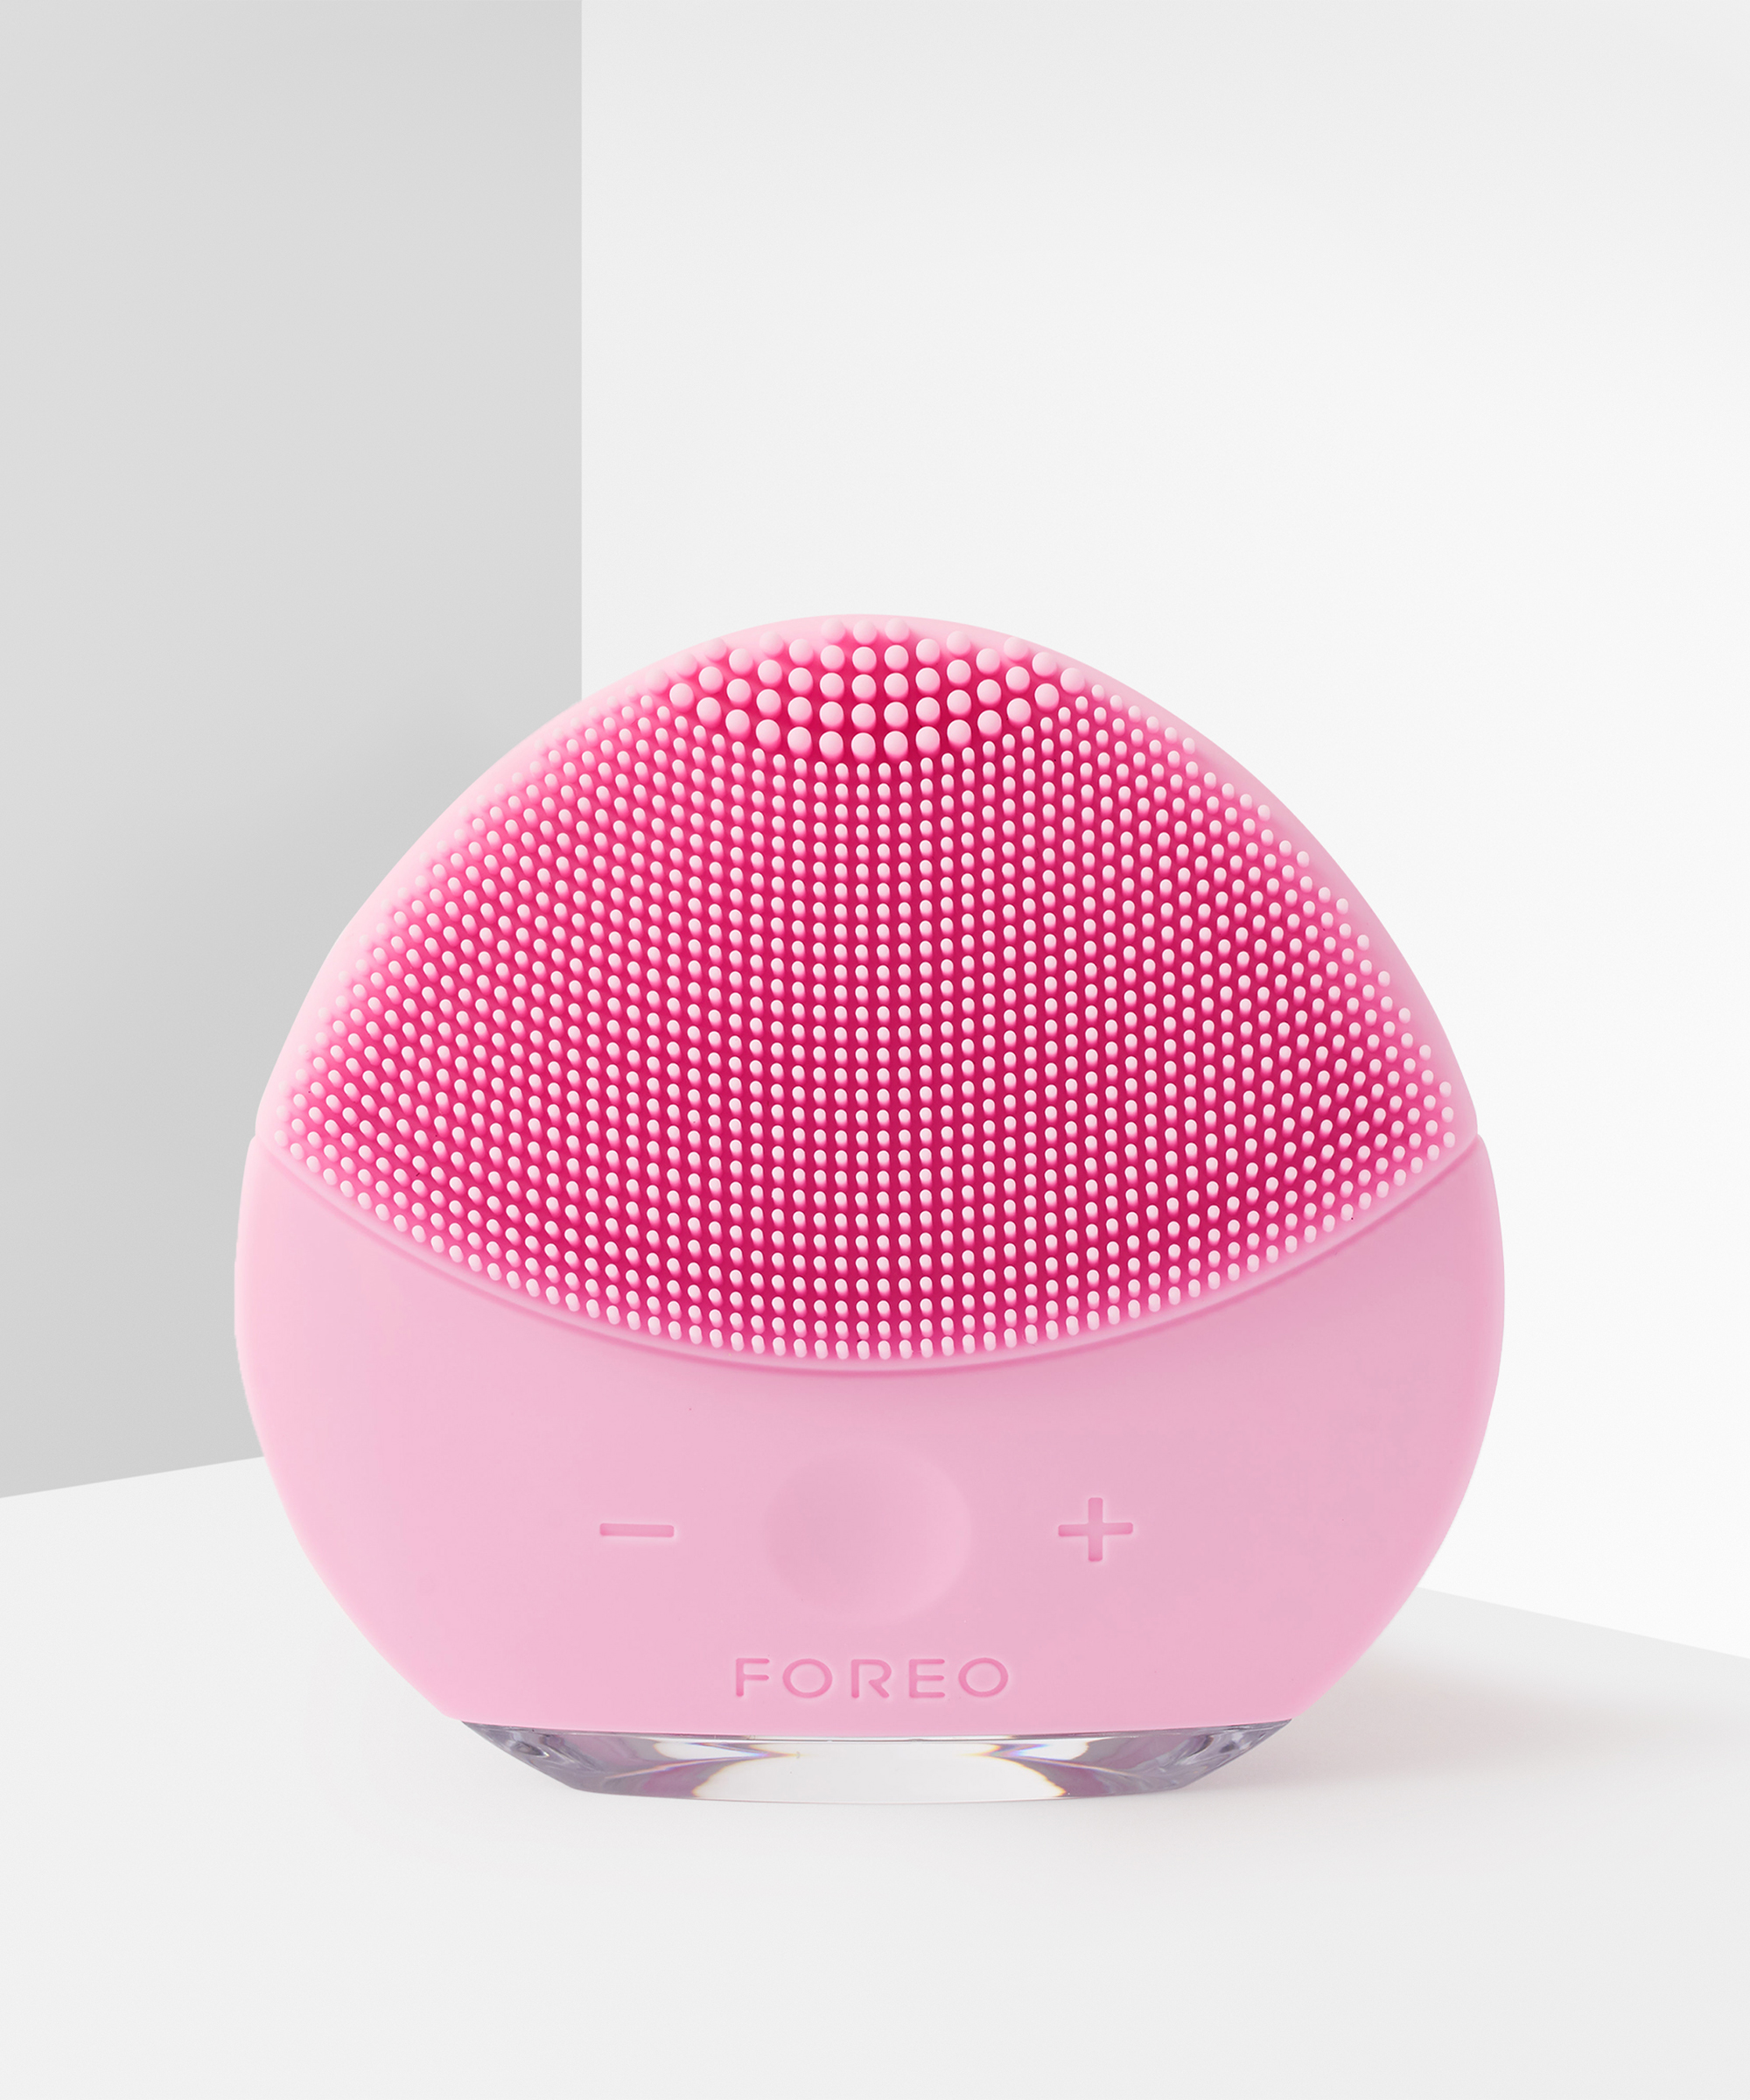 Foreo 2 All Dual-Sided BEAUTY Face at For Brush LUNA™ Types Skin Mini BAY